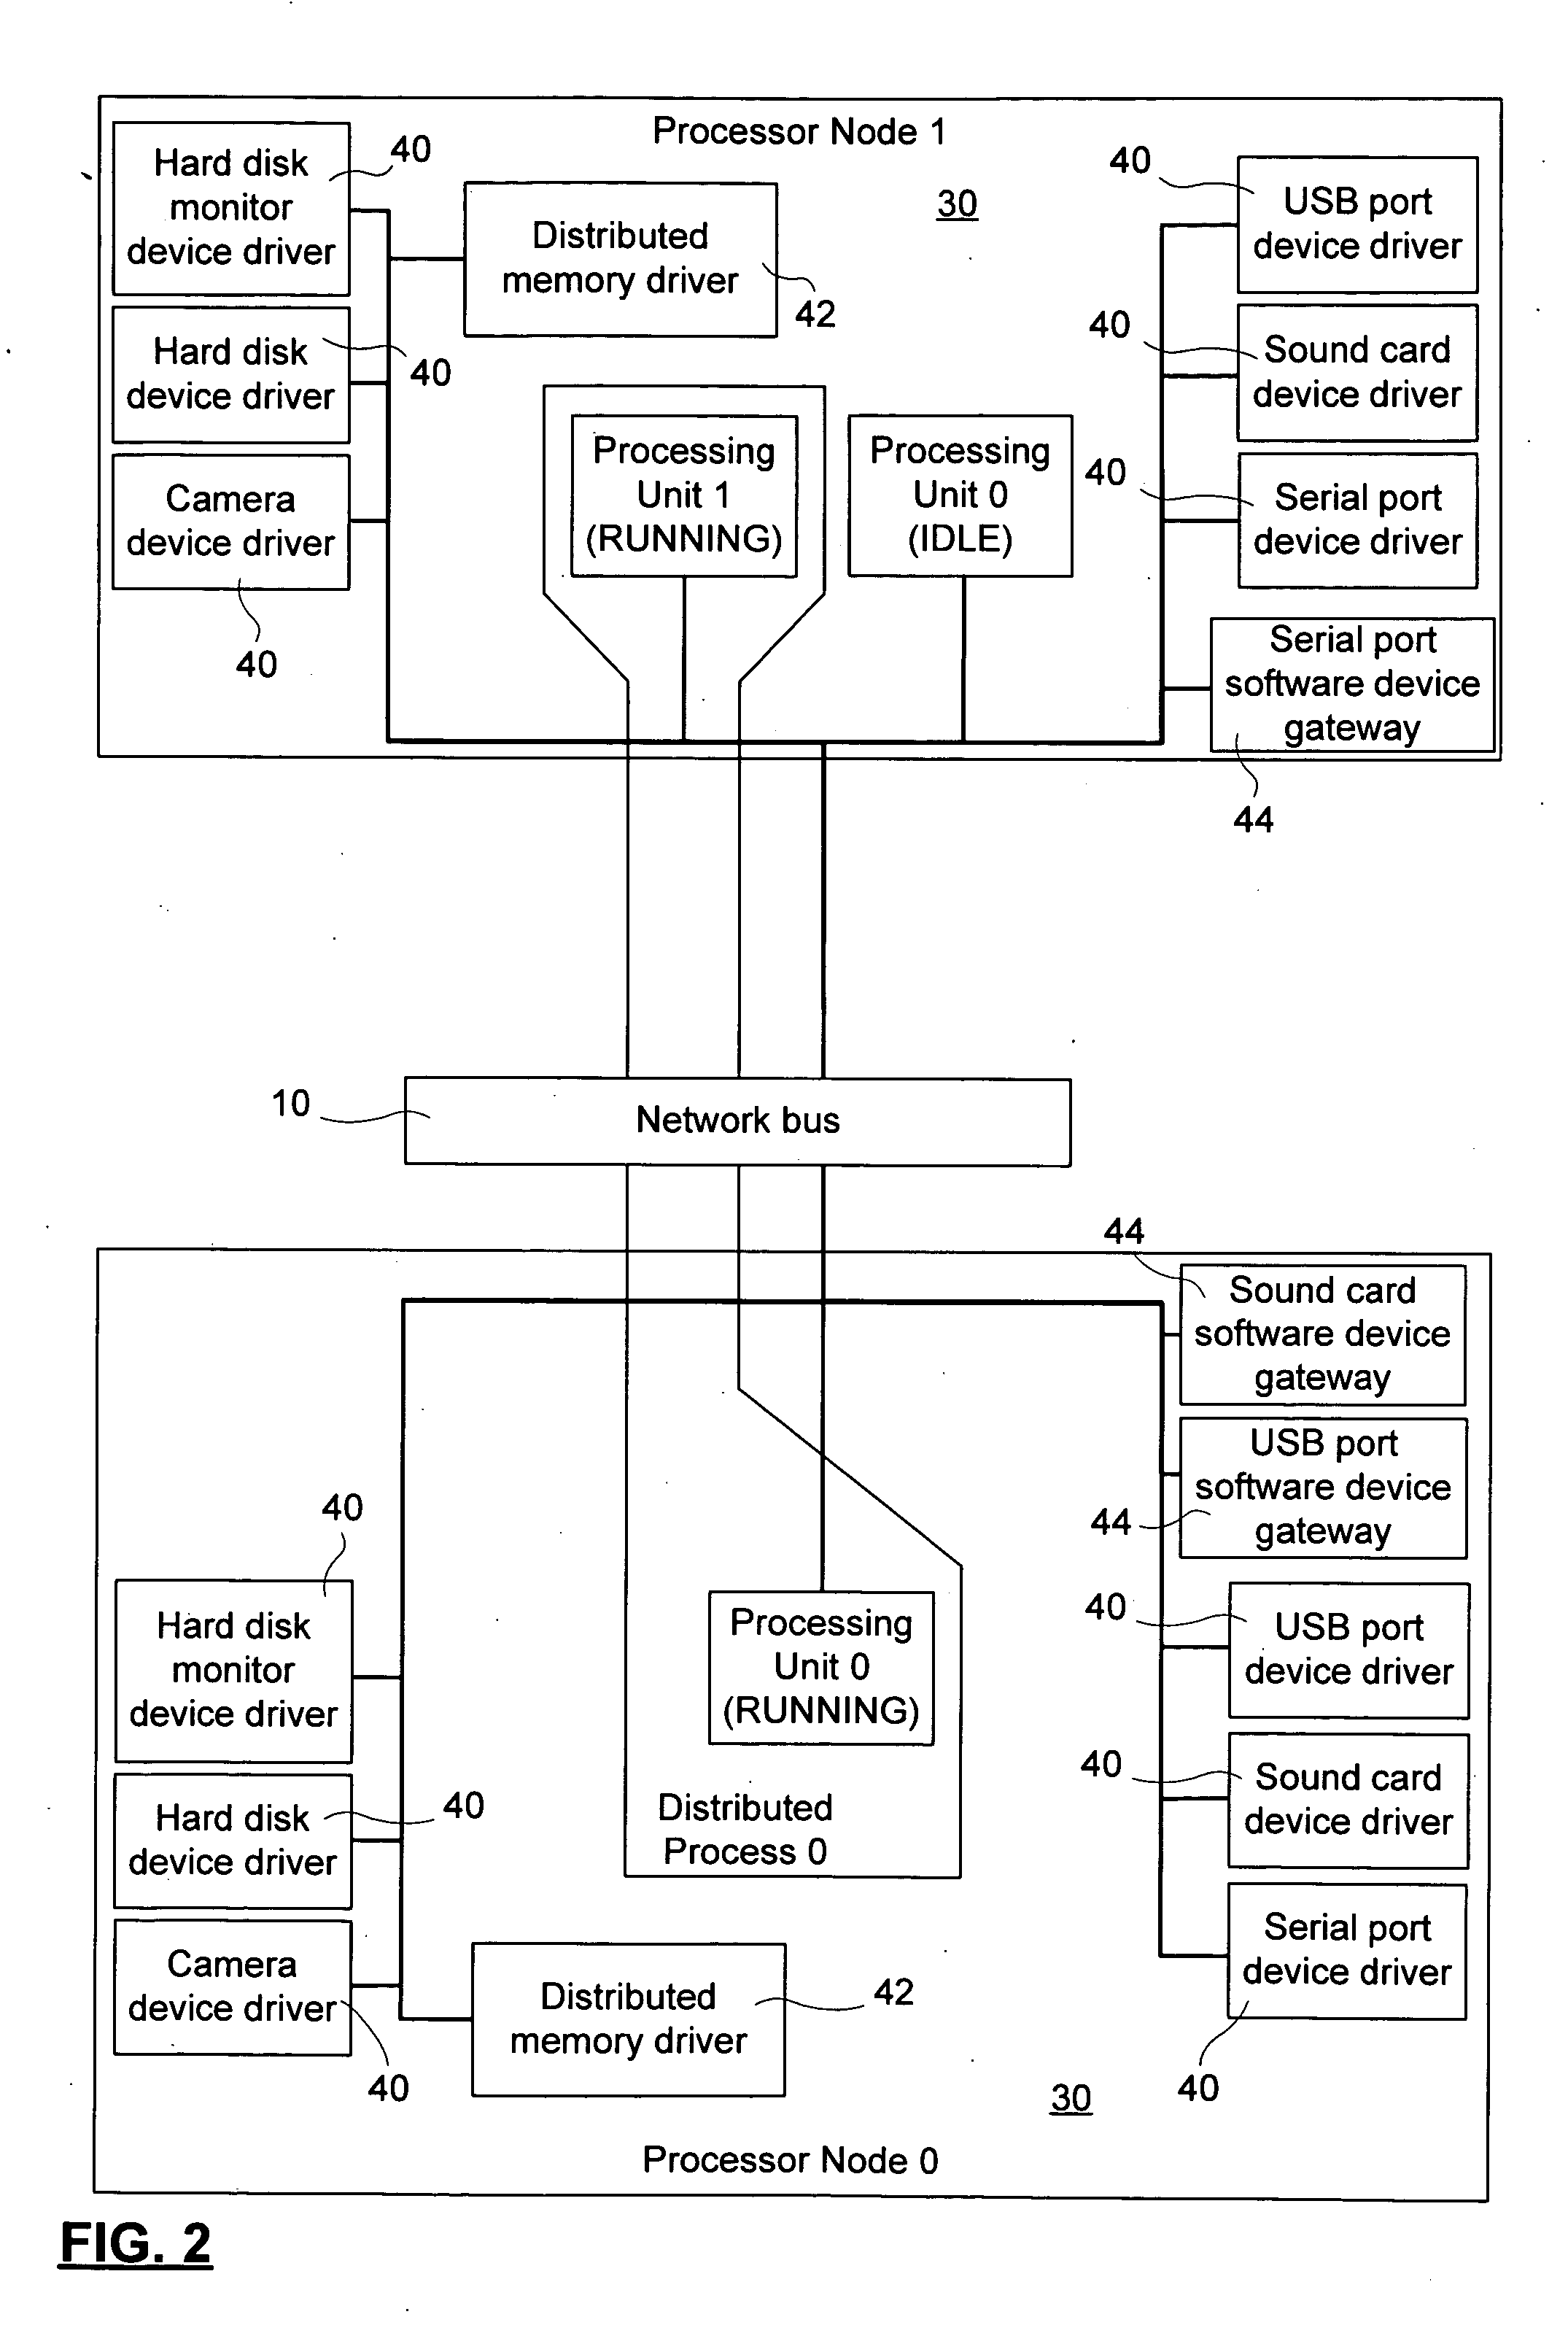 Methods and apparatus for enabling bus connectivity over a data network